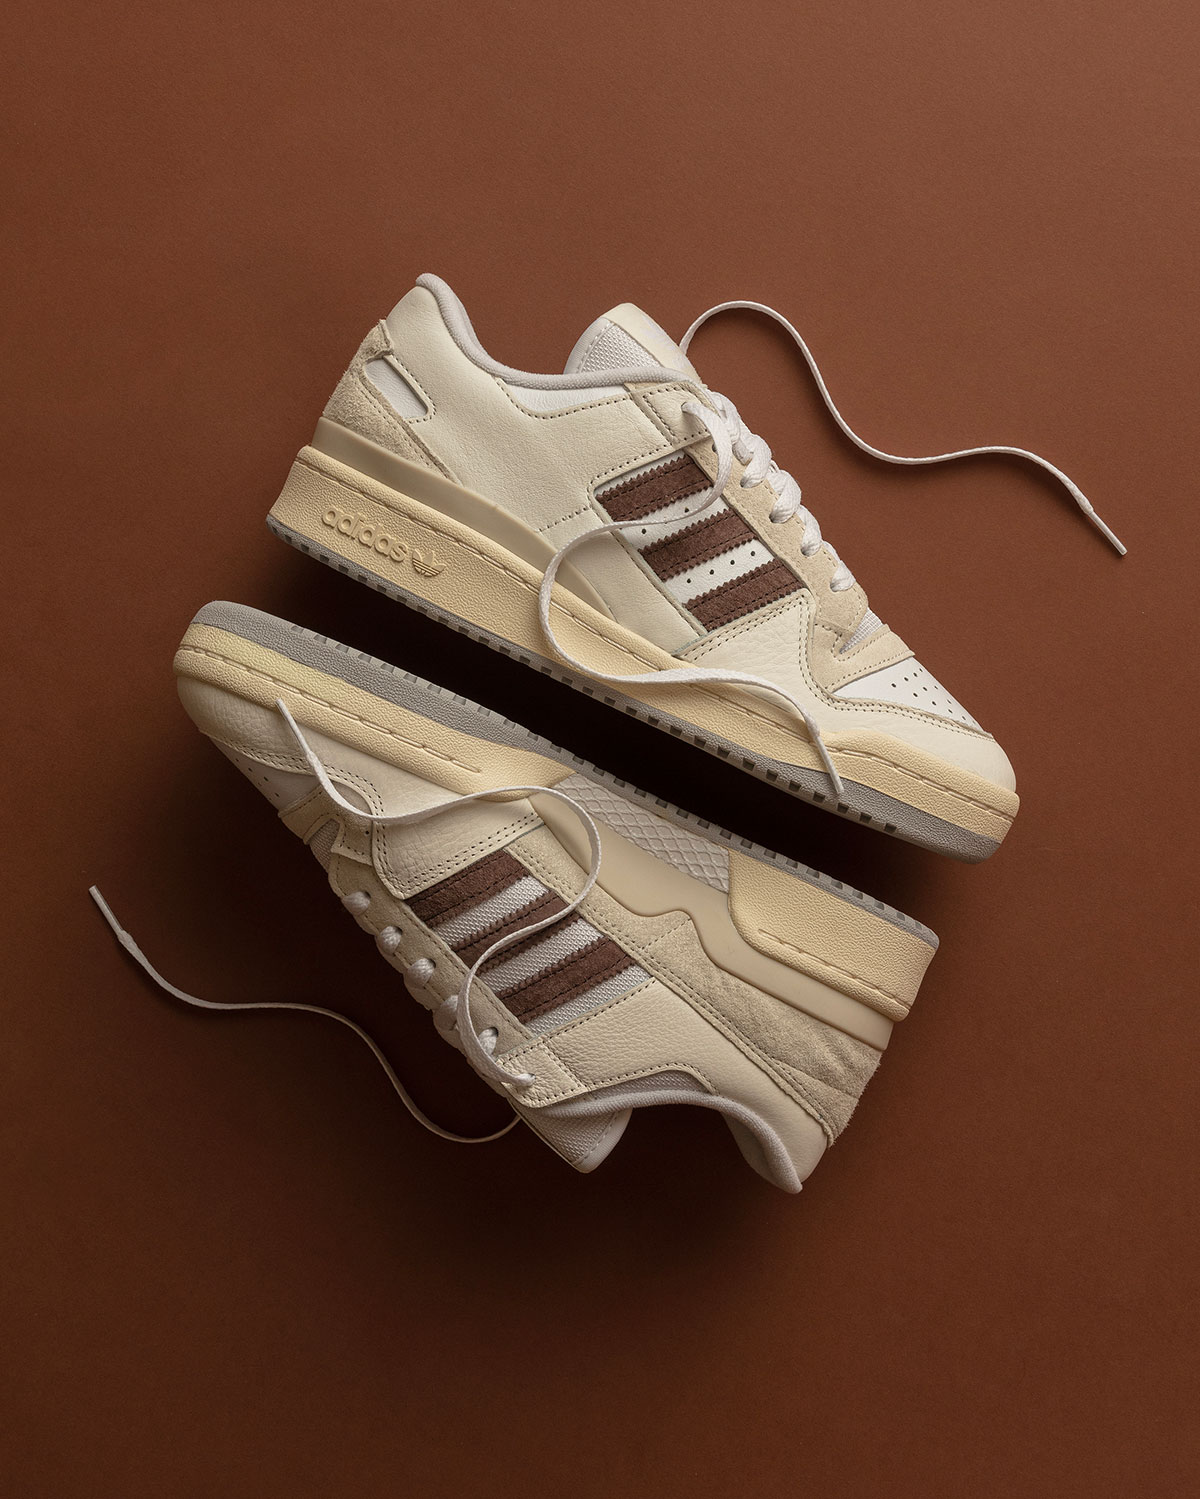 Packer Adidas Forum Low Cocoa